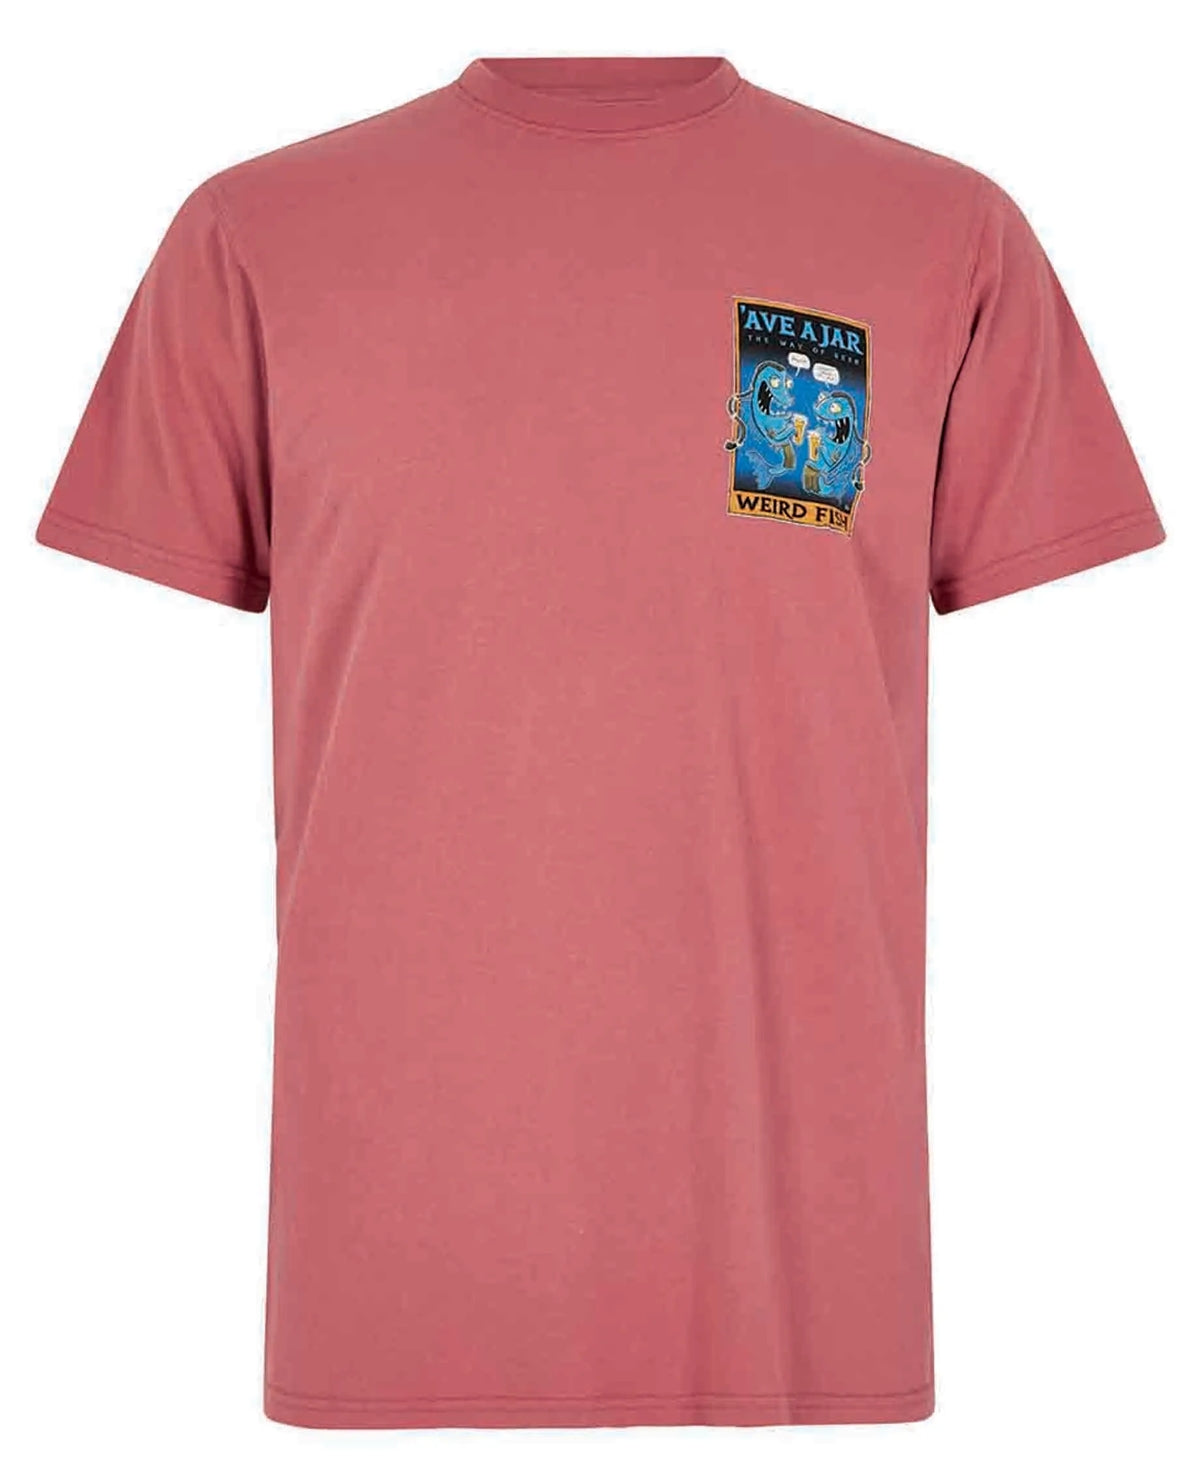 Weird Fish men's Ave a Jar printed Avatar: The Way of Water themed short sleeve tee in Rosewood.